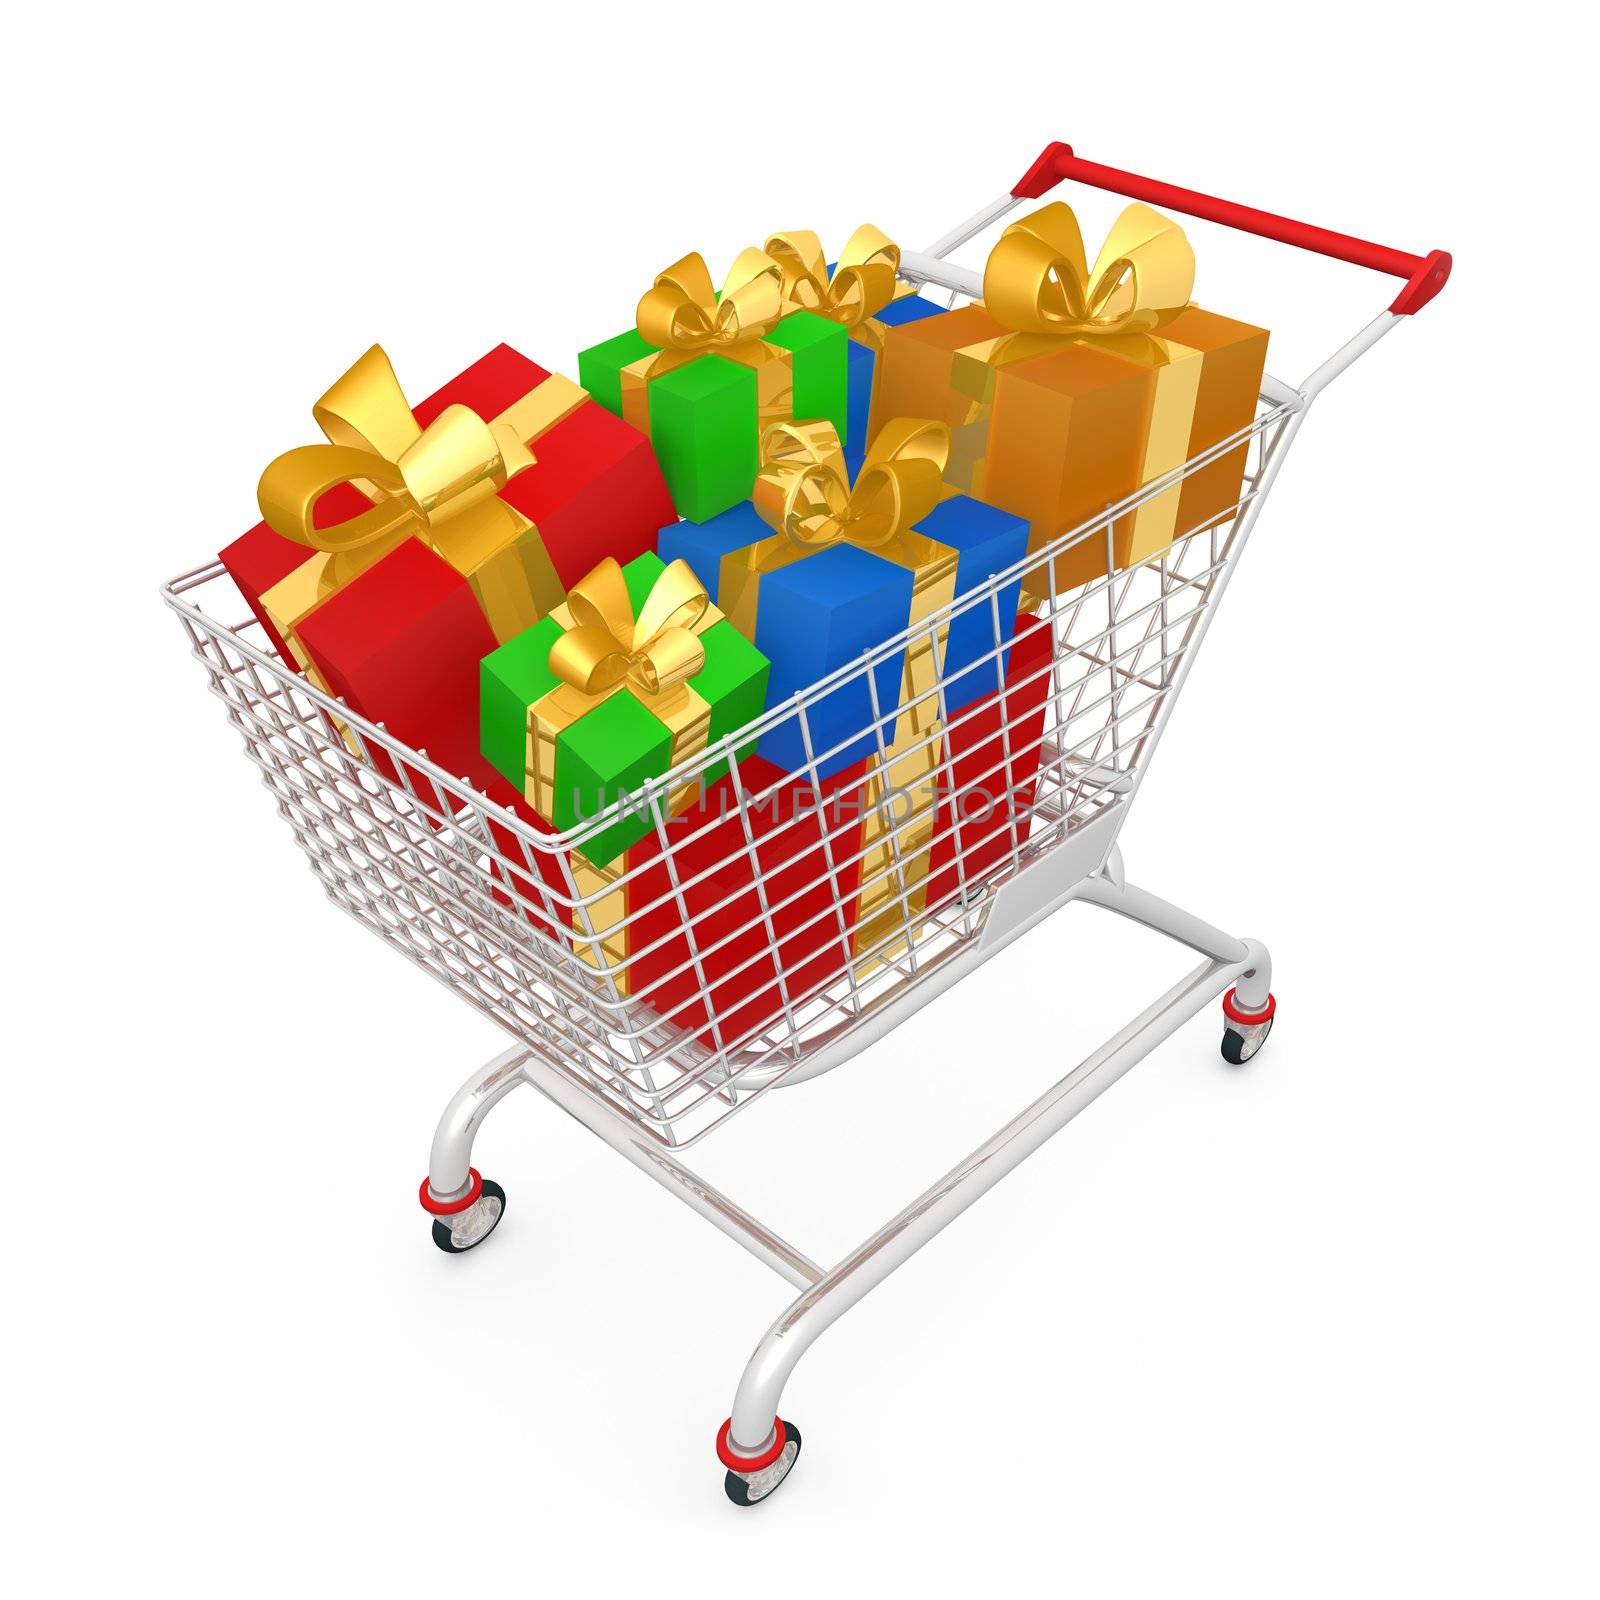 Shopping Cart With Presents by 3pod